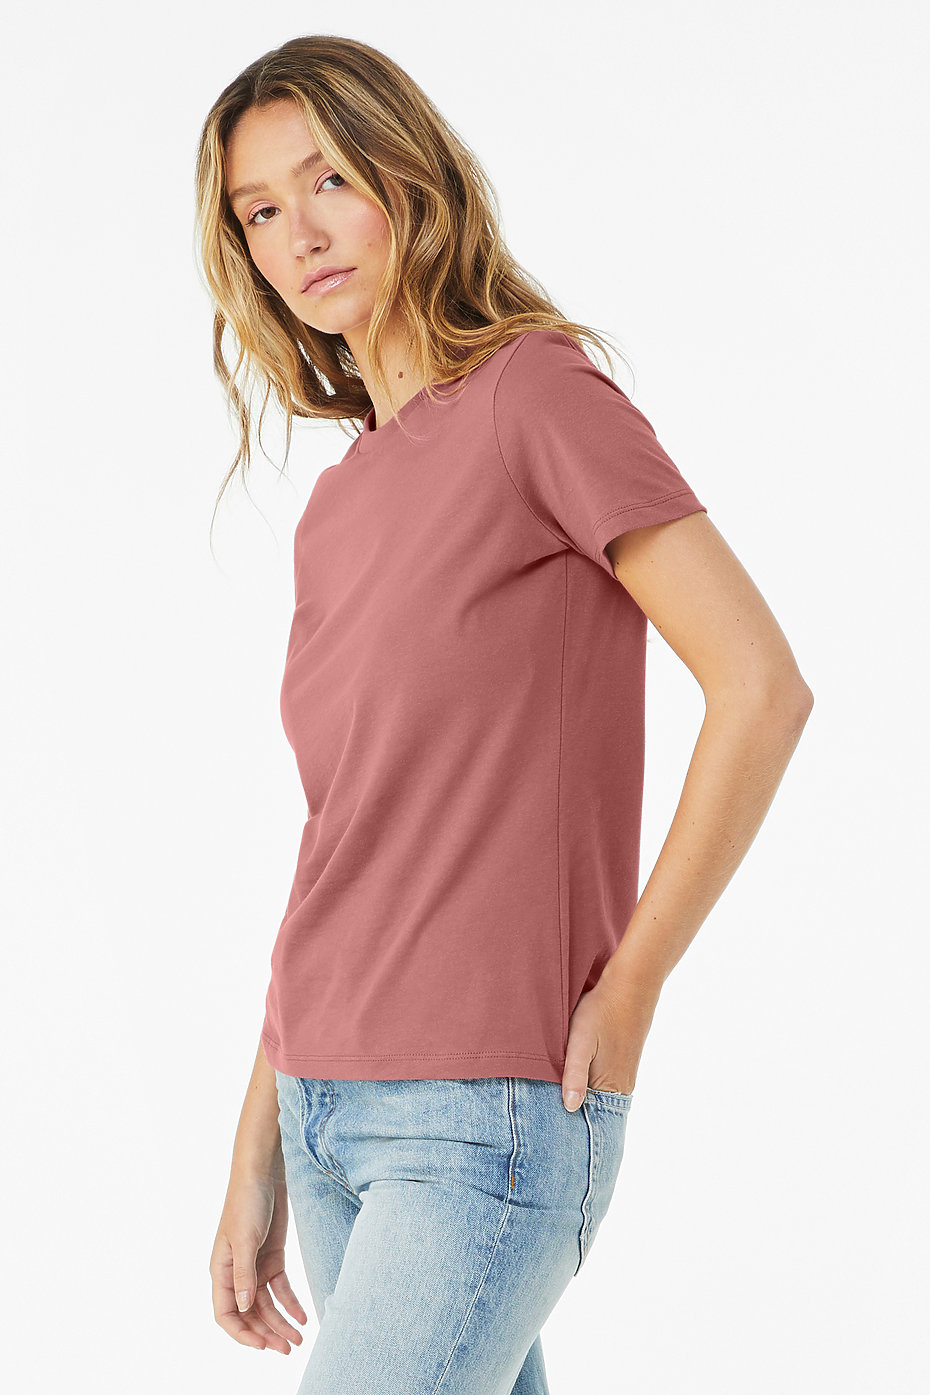 Bella + Canvas B6400 Ladies' Relaxed Jersey Short-Sleeve T-Shirt - Military Green - S